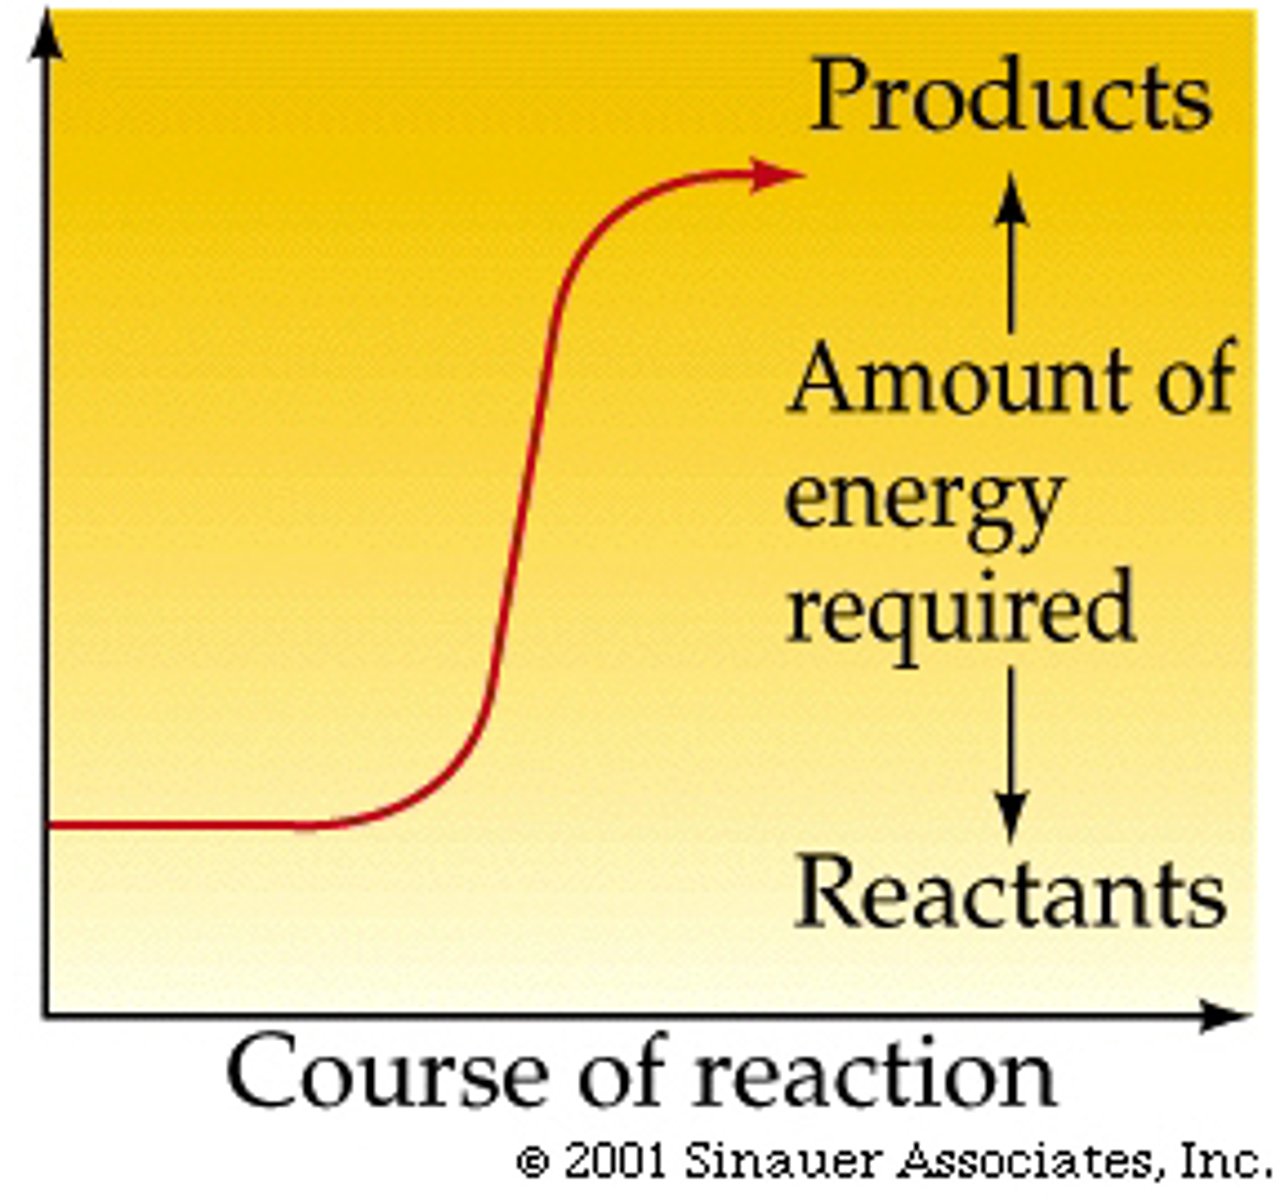 <p>Reaction that absorbs free energy from its surroundings.</p>